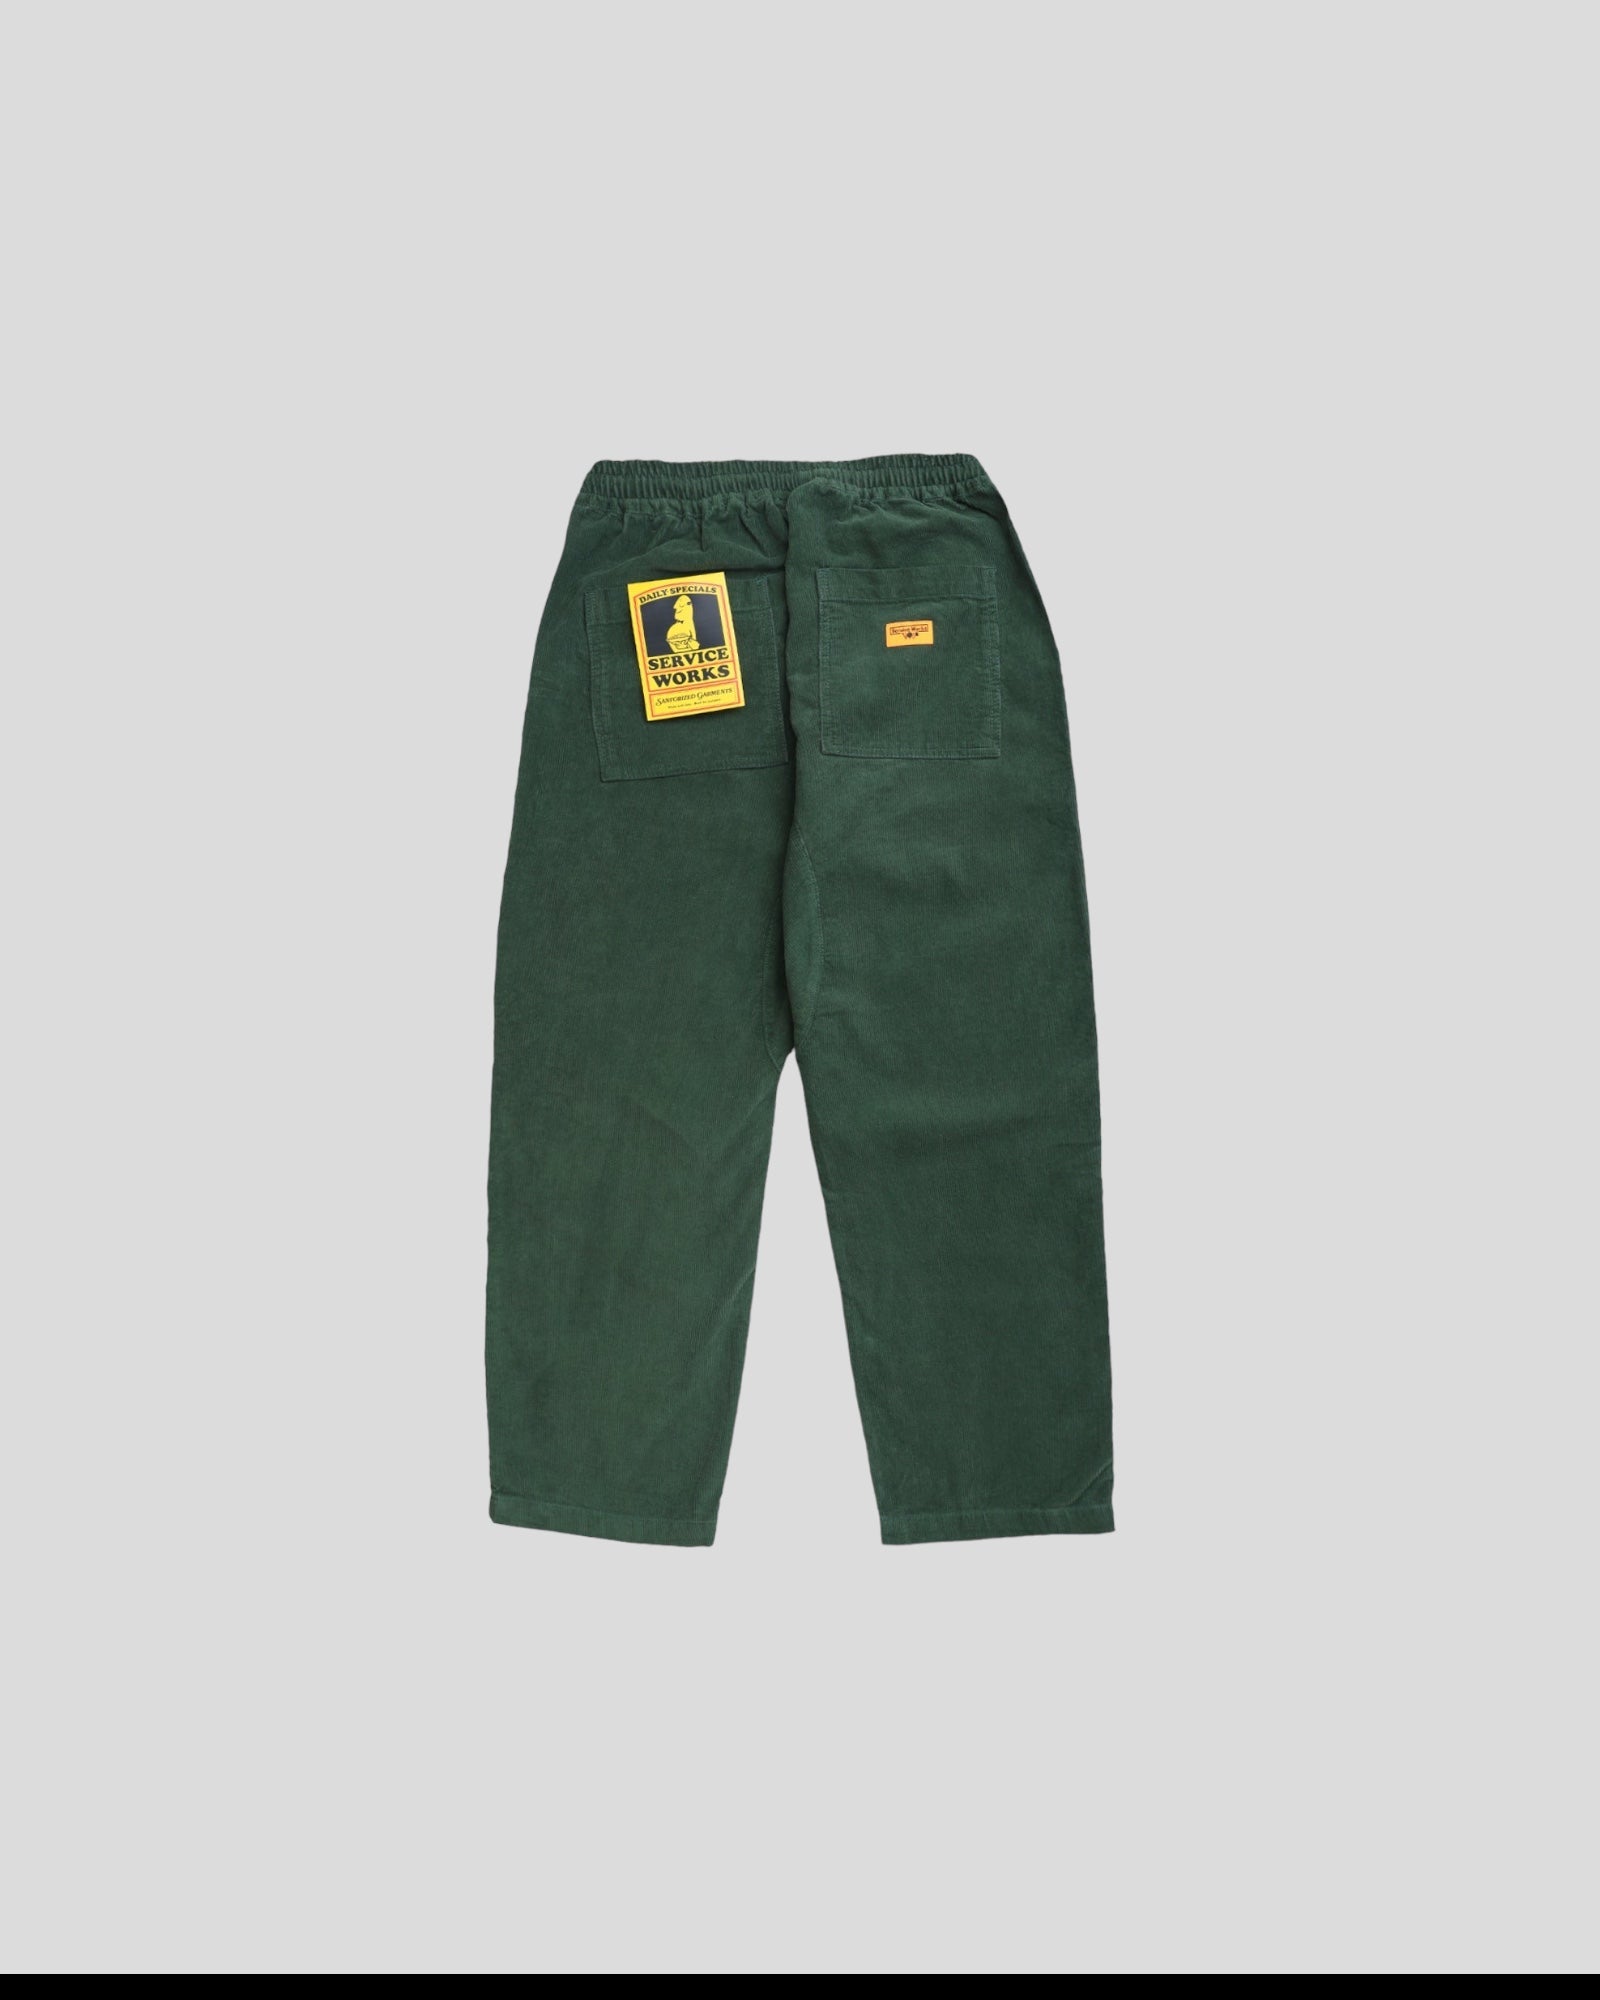 Service Works || Corduroy Chef Pants - Forest